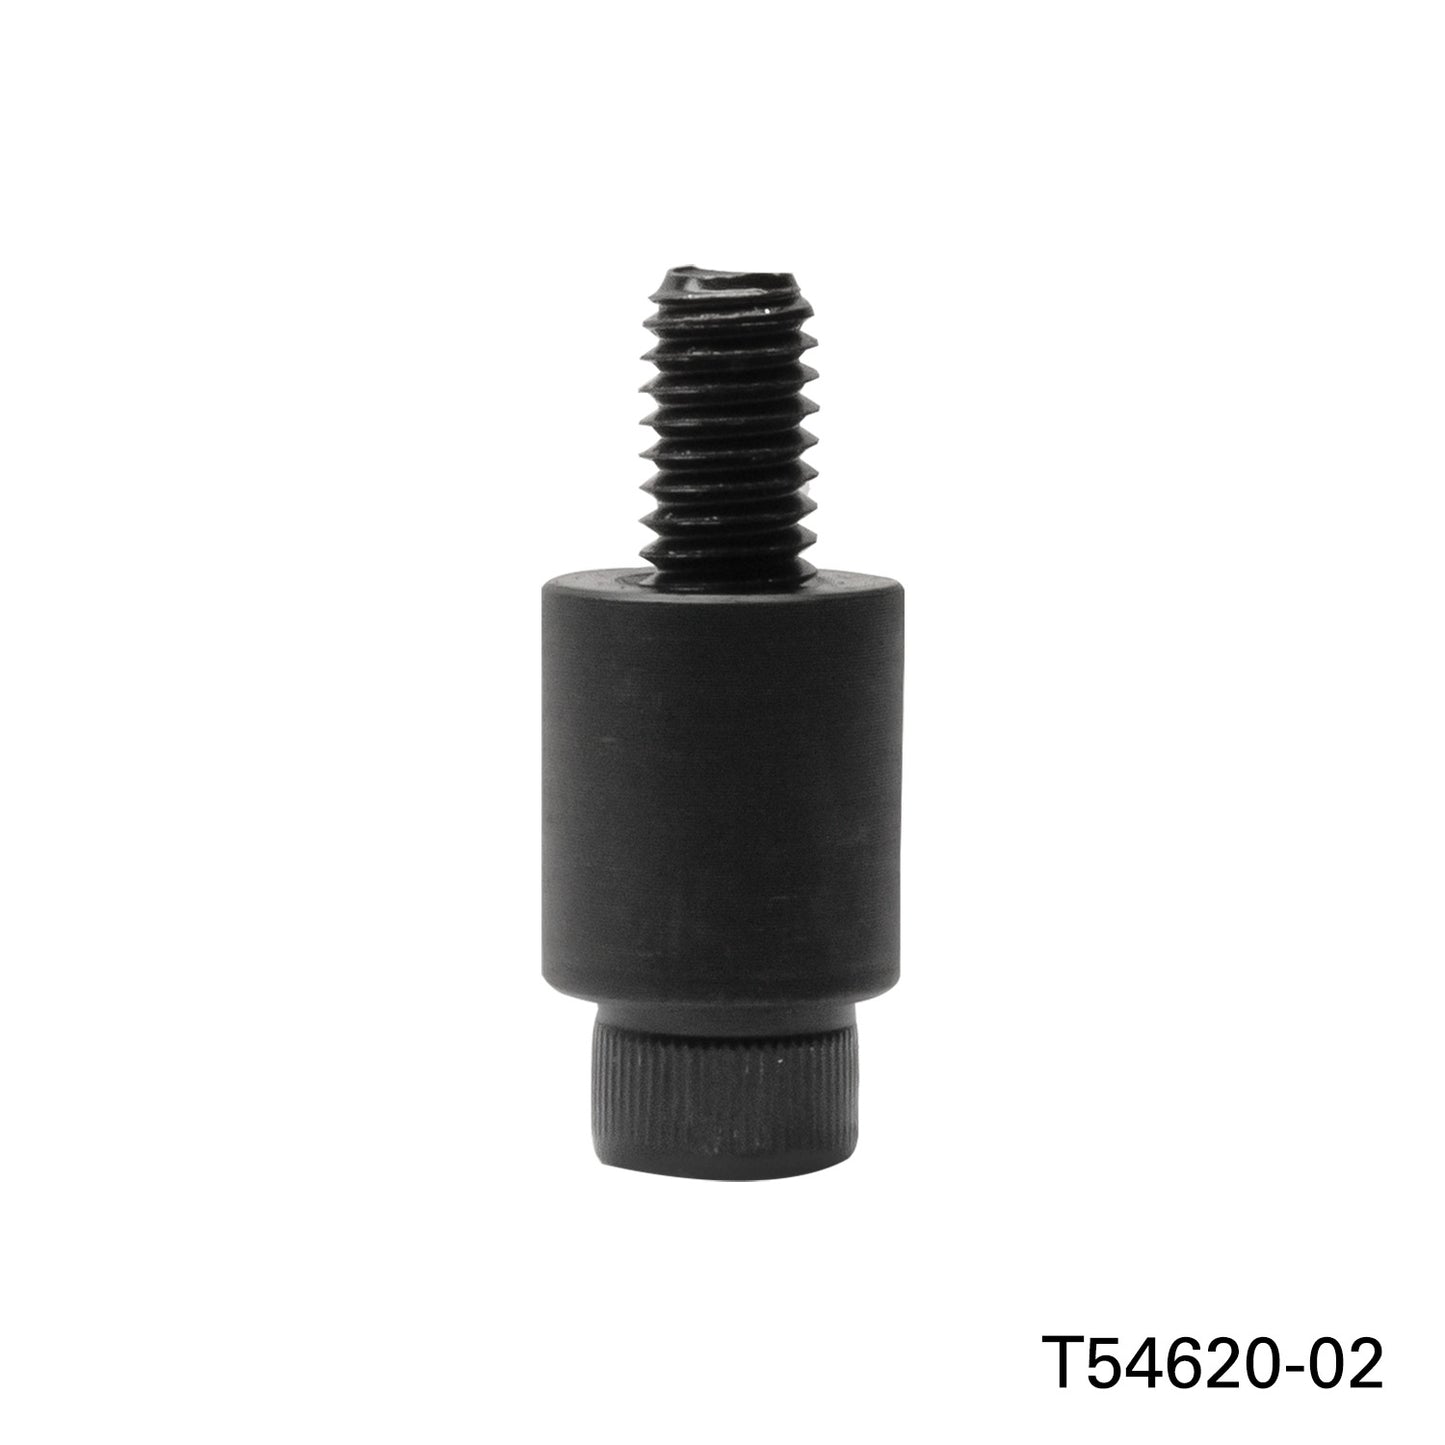 Adapter for Inserta Pliers, Fit 5/8 Holes